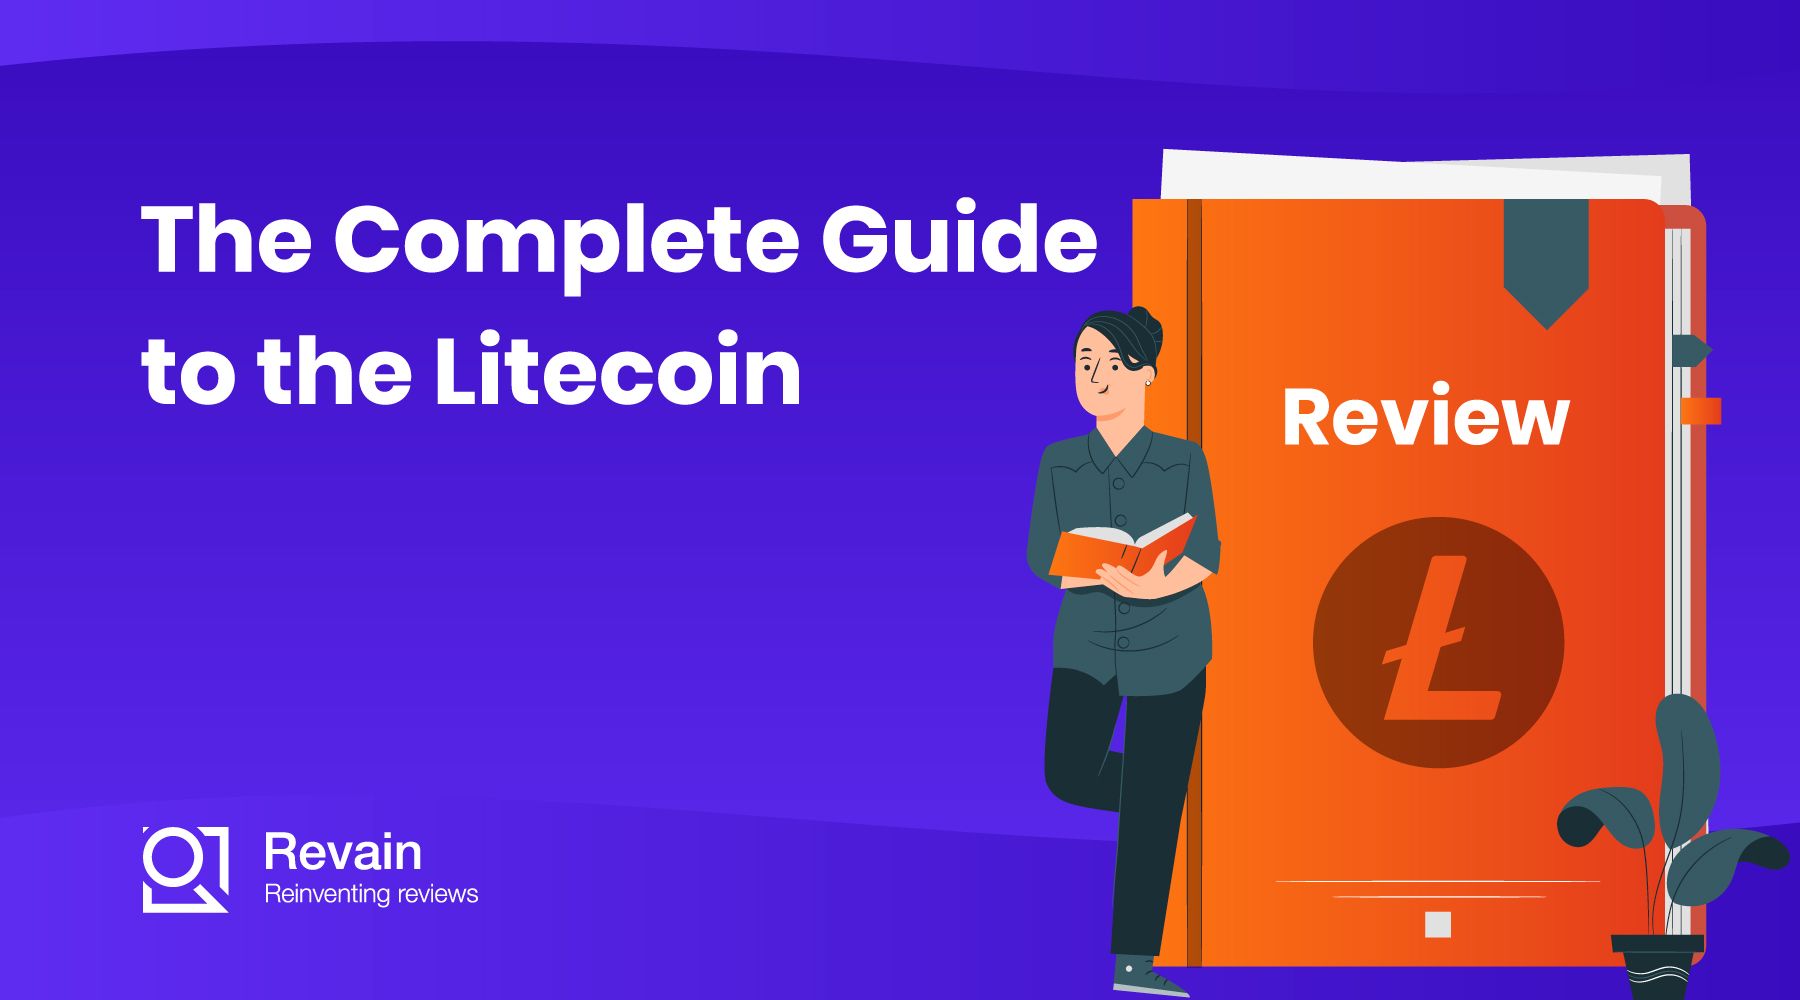 Article The Complete Guide to the Litecoin